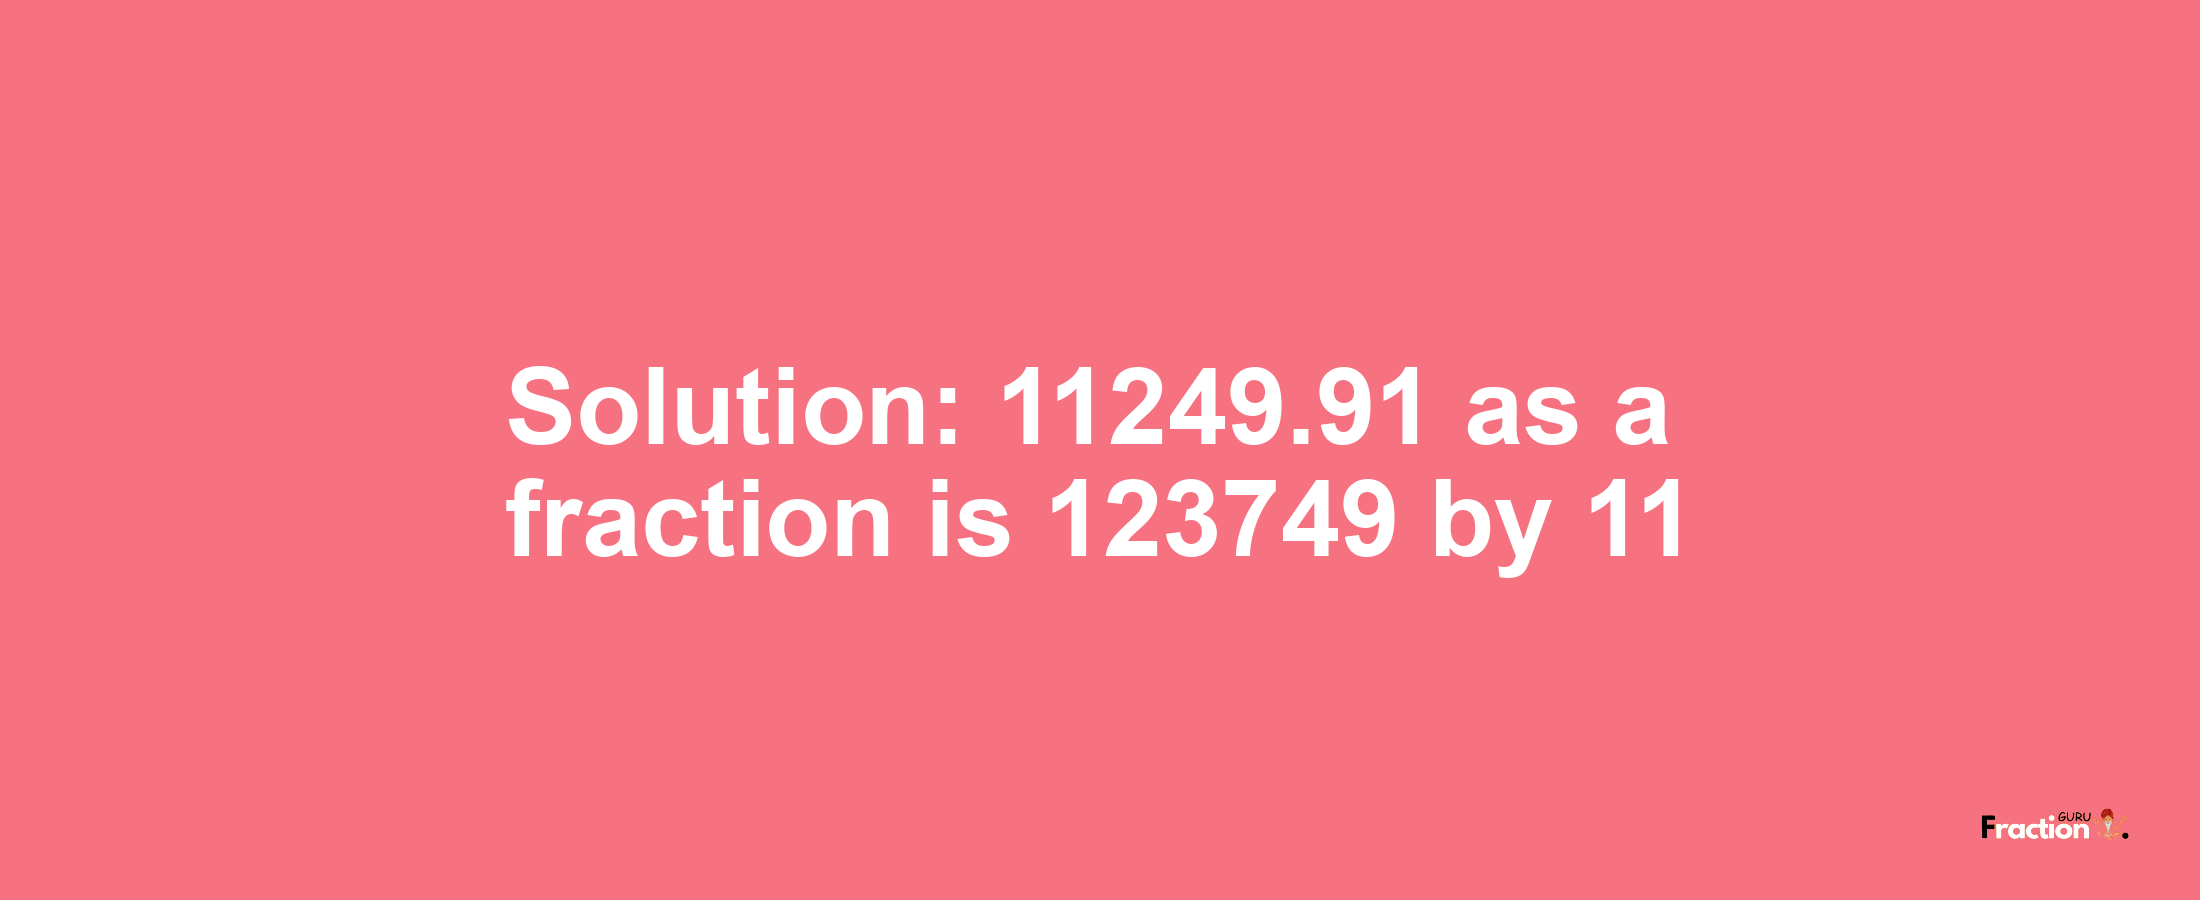 Solution:11249.91 as a fraction is 123749/11